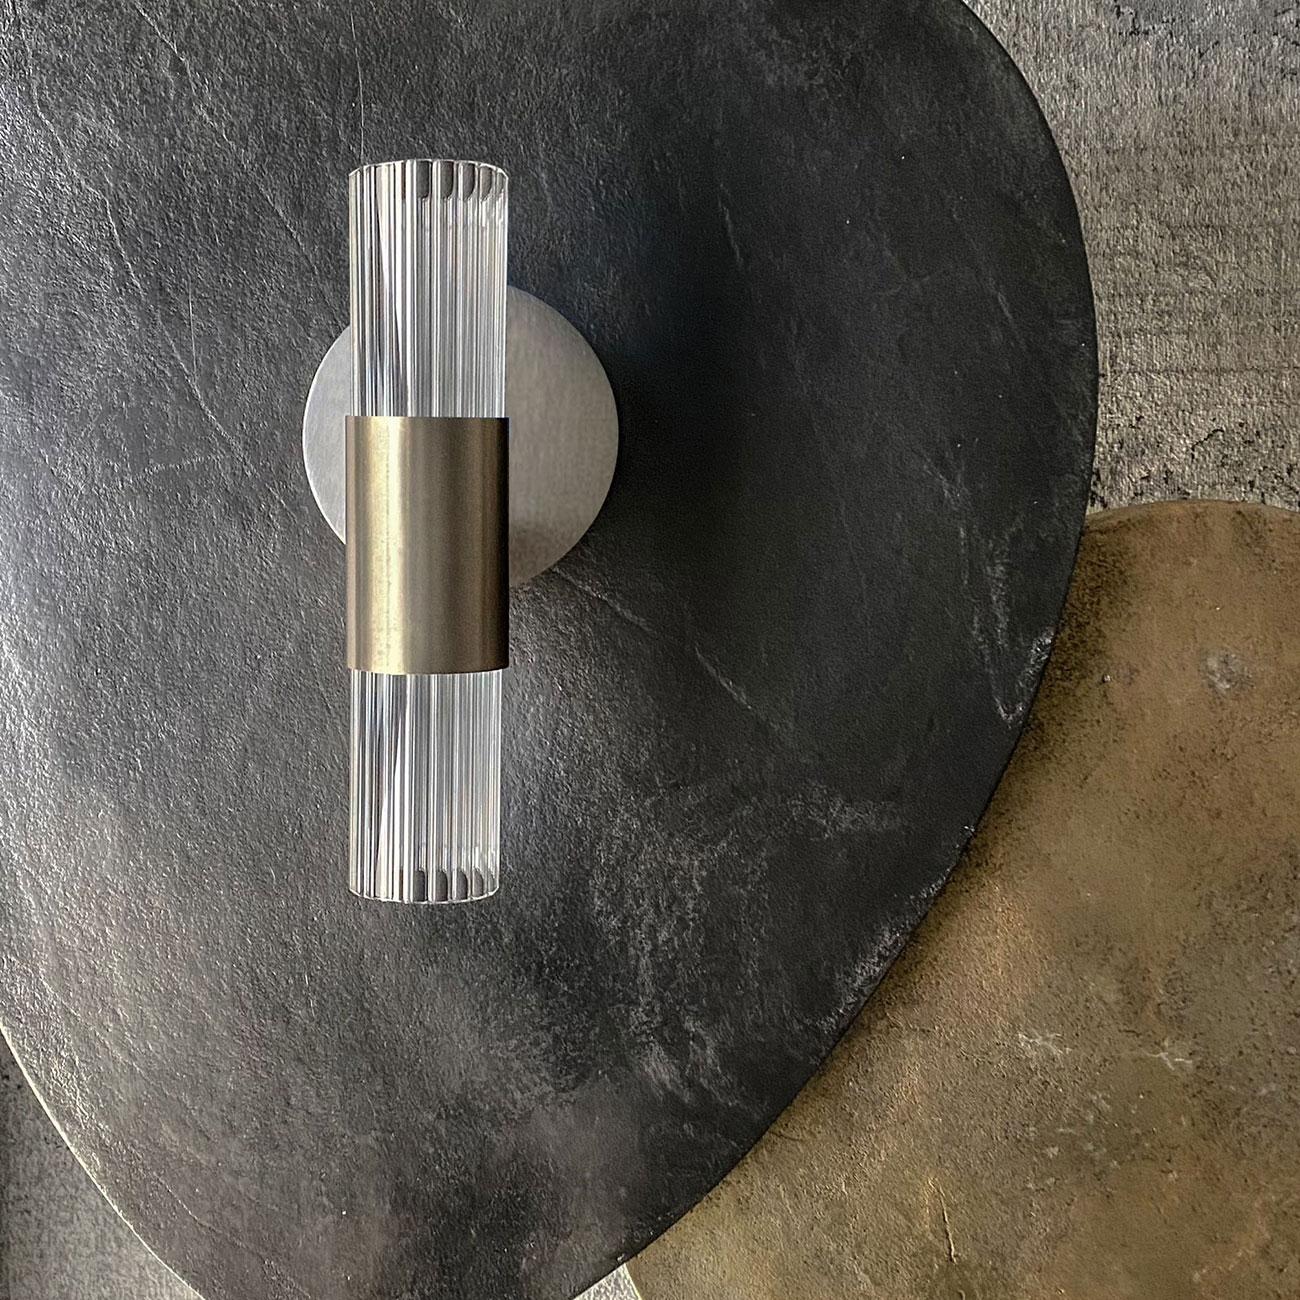 Sbarlusc Wall Lamp by Luce Tu.
Dimensions: 13 x H 27.5 cm.
Materials: brass and glass.

Cutting-edge technology and craftsmanship come together in this applique with an almost timeless charm. Like a precious jewel, the wall lamp from the